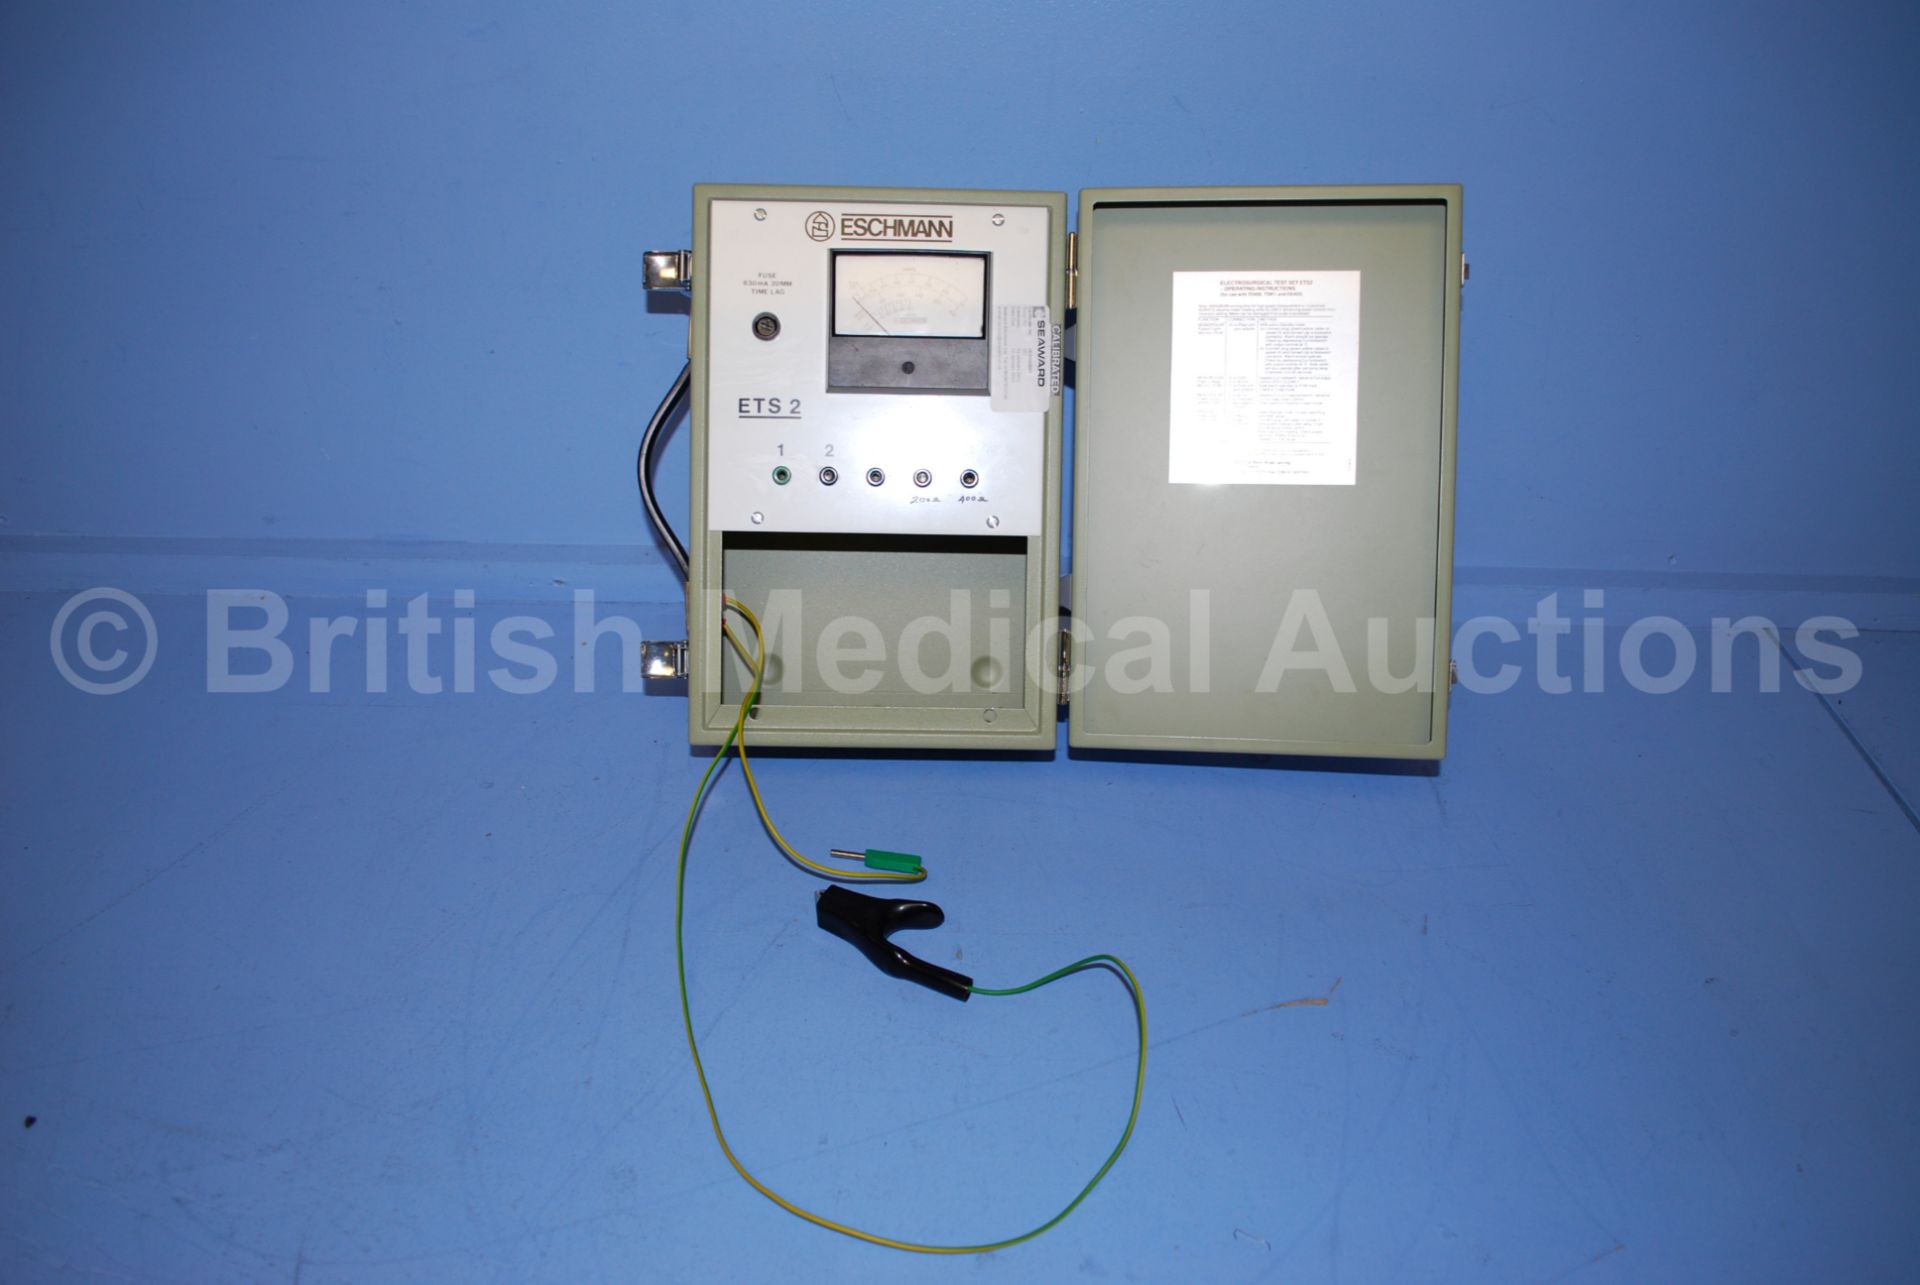 Eschmann ETS2 Electrosurgical Testing System with